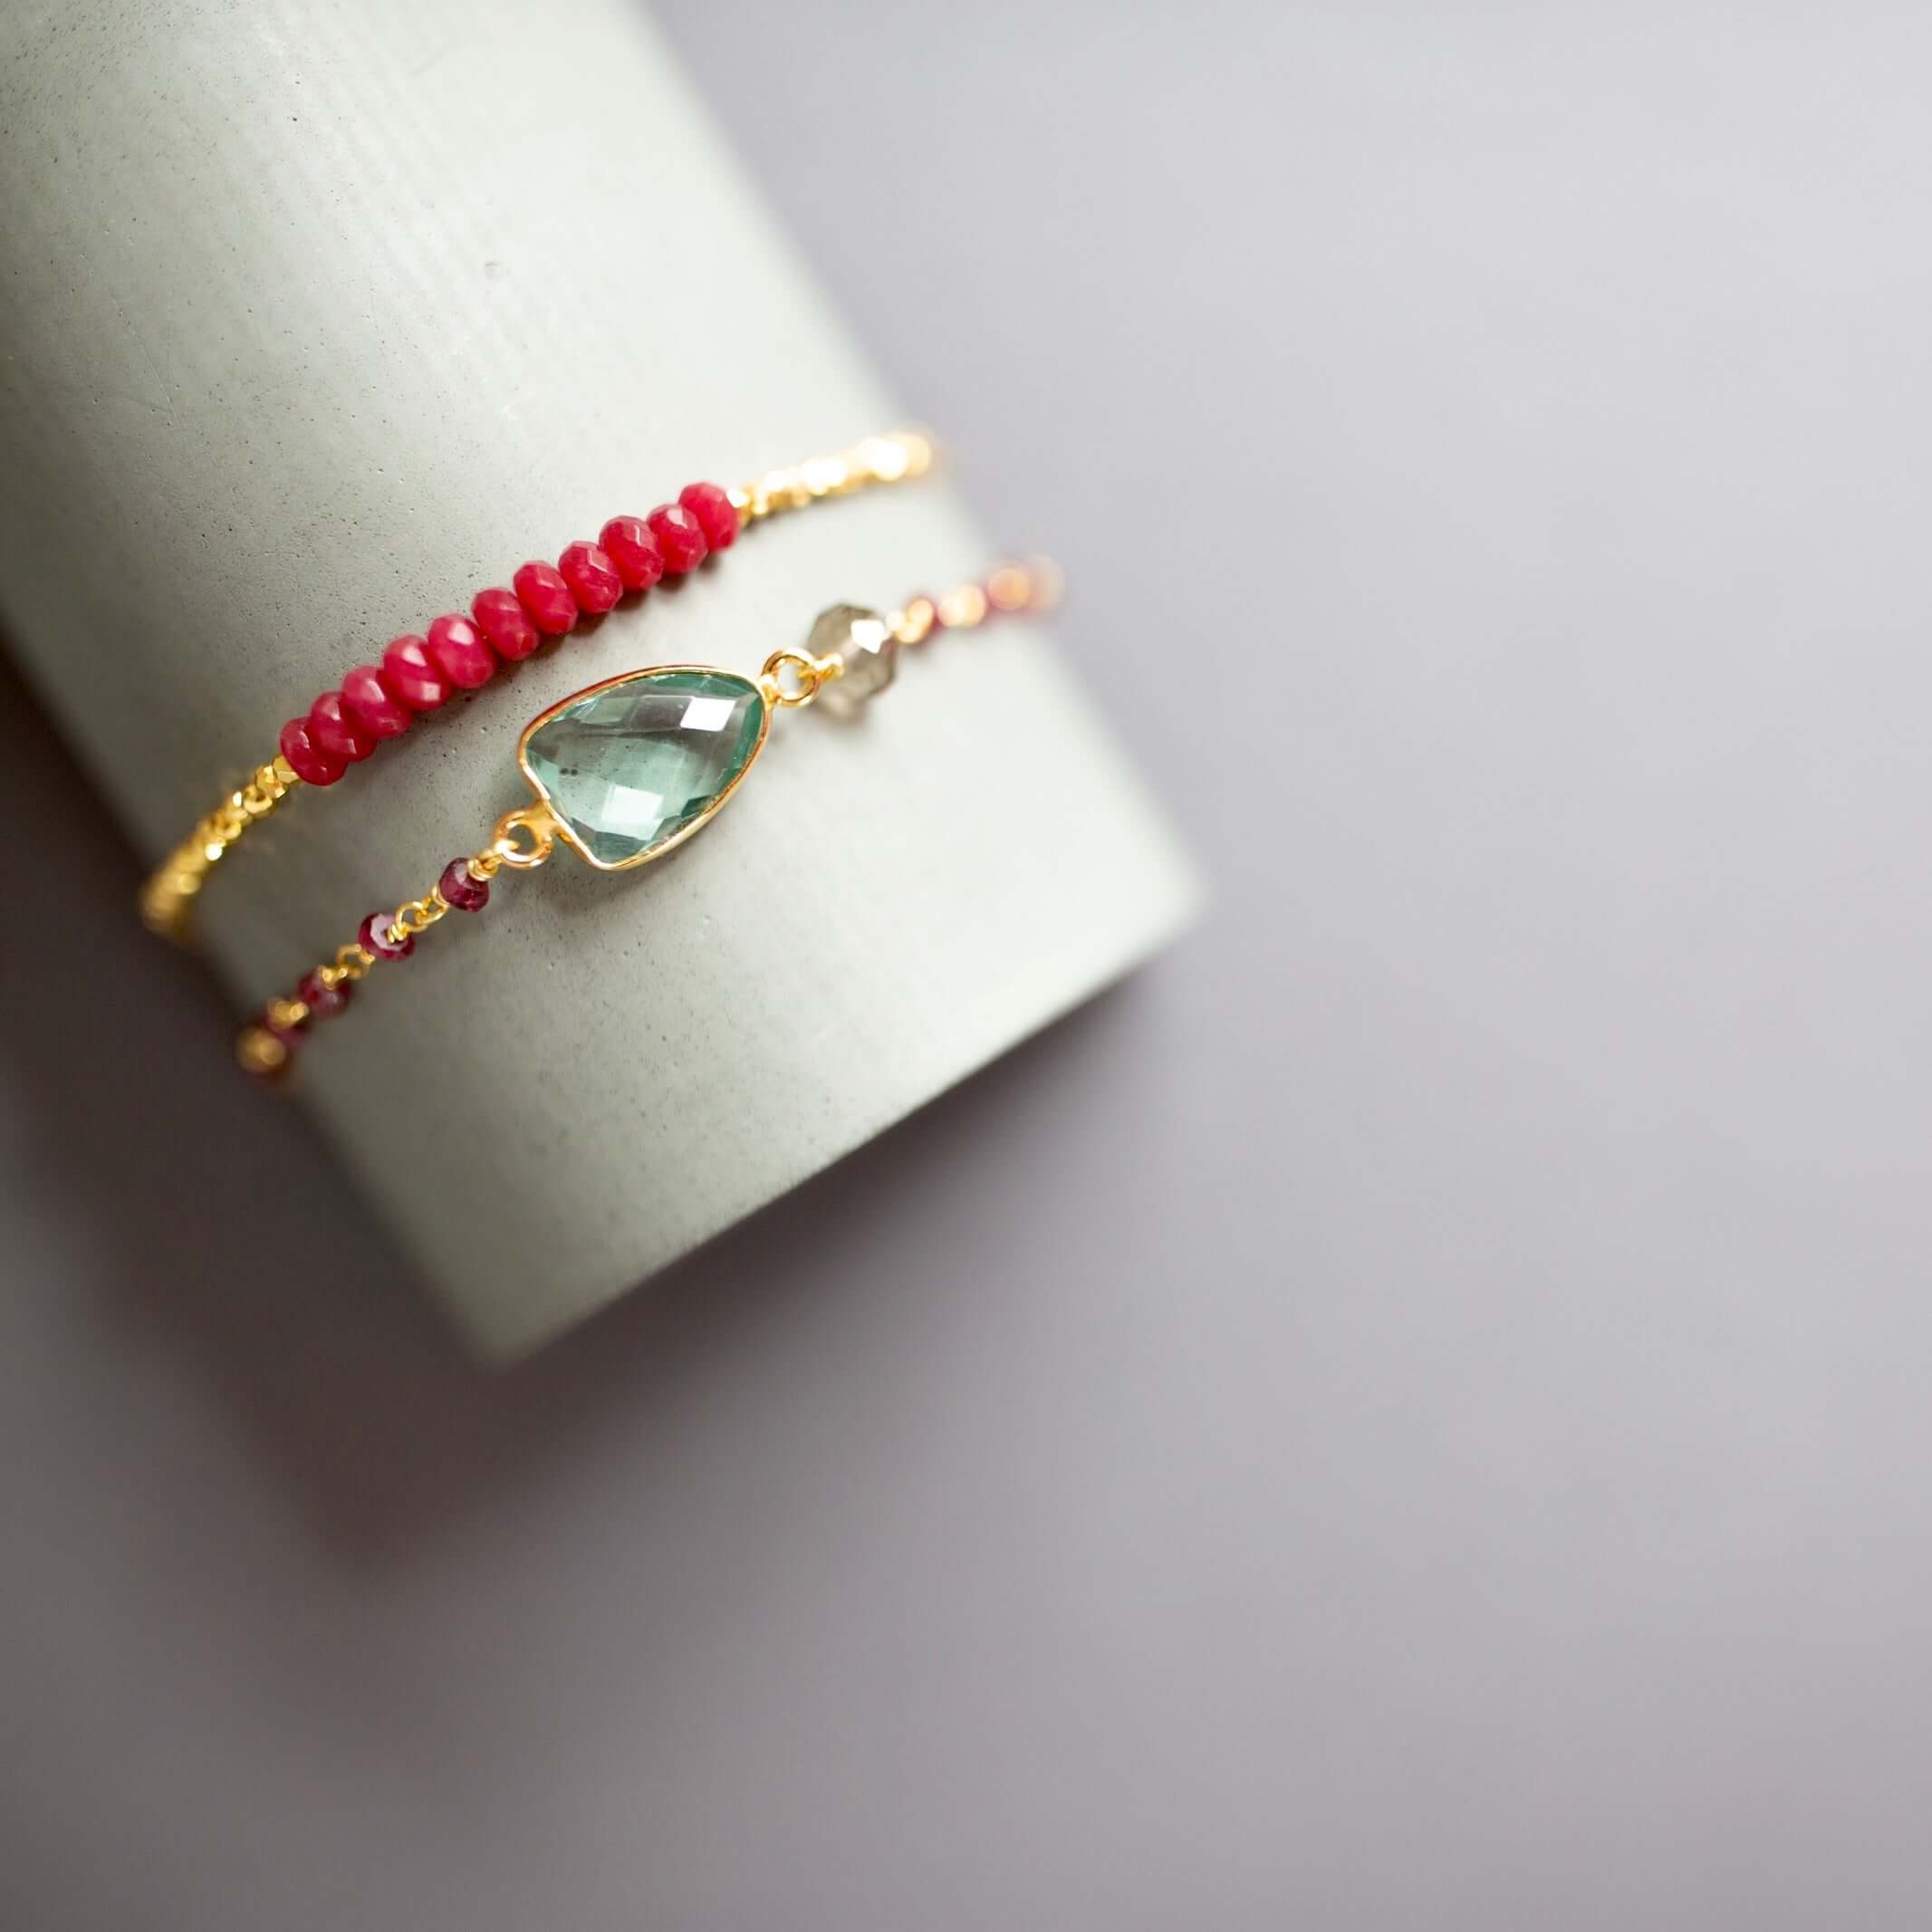 Gold plated Adjustable Bracelet with Green Amethyst Bezel and Tiny Gemstone Accents.